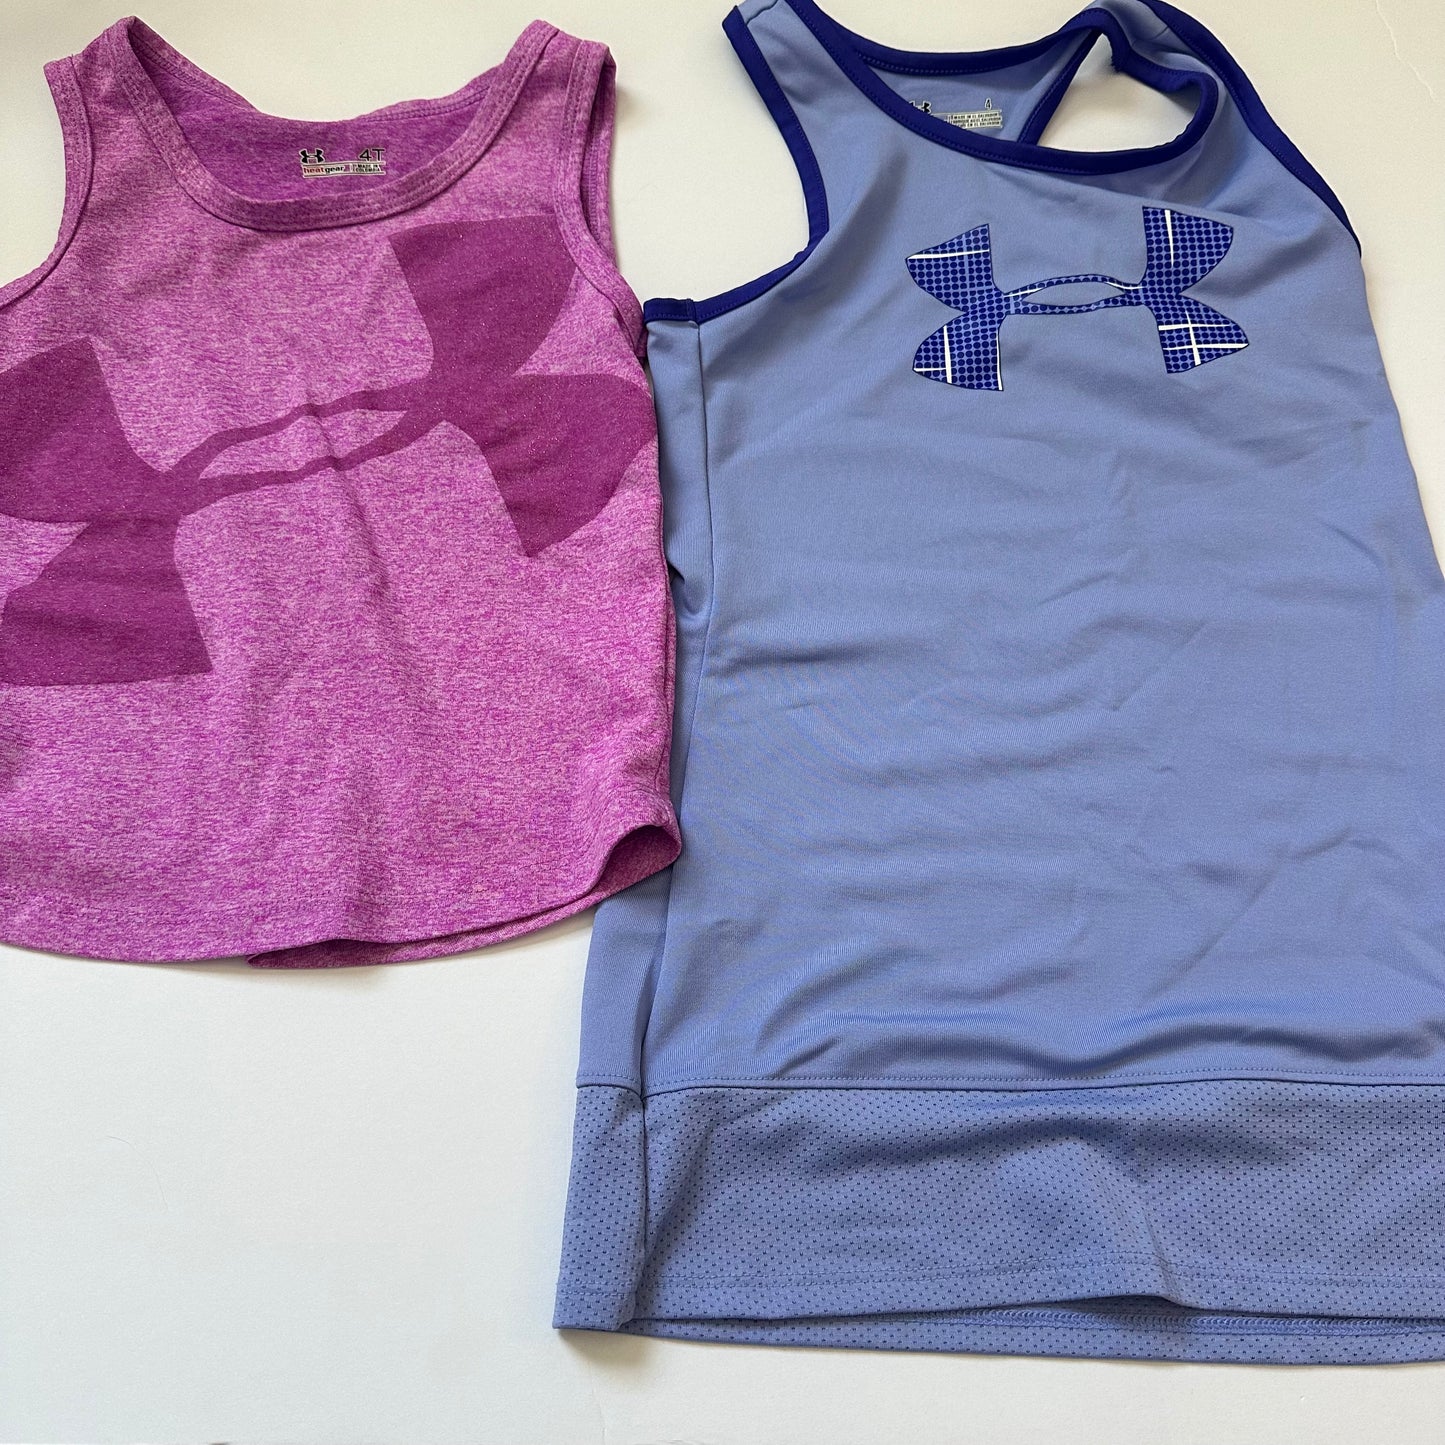 4T Under Armour tank and dress